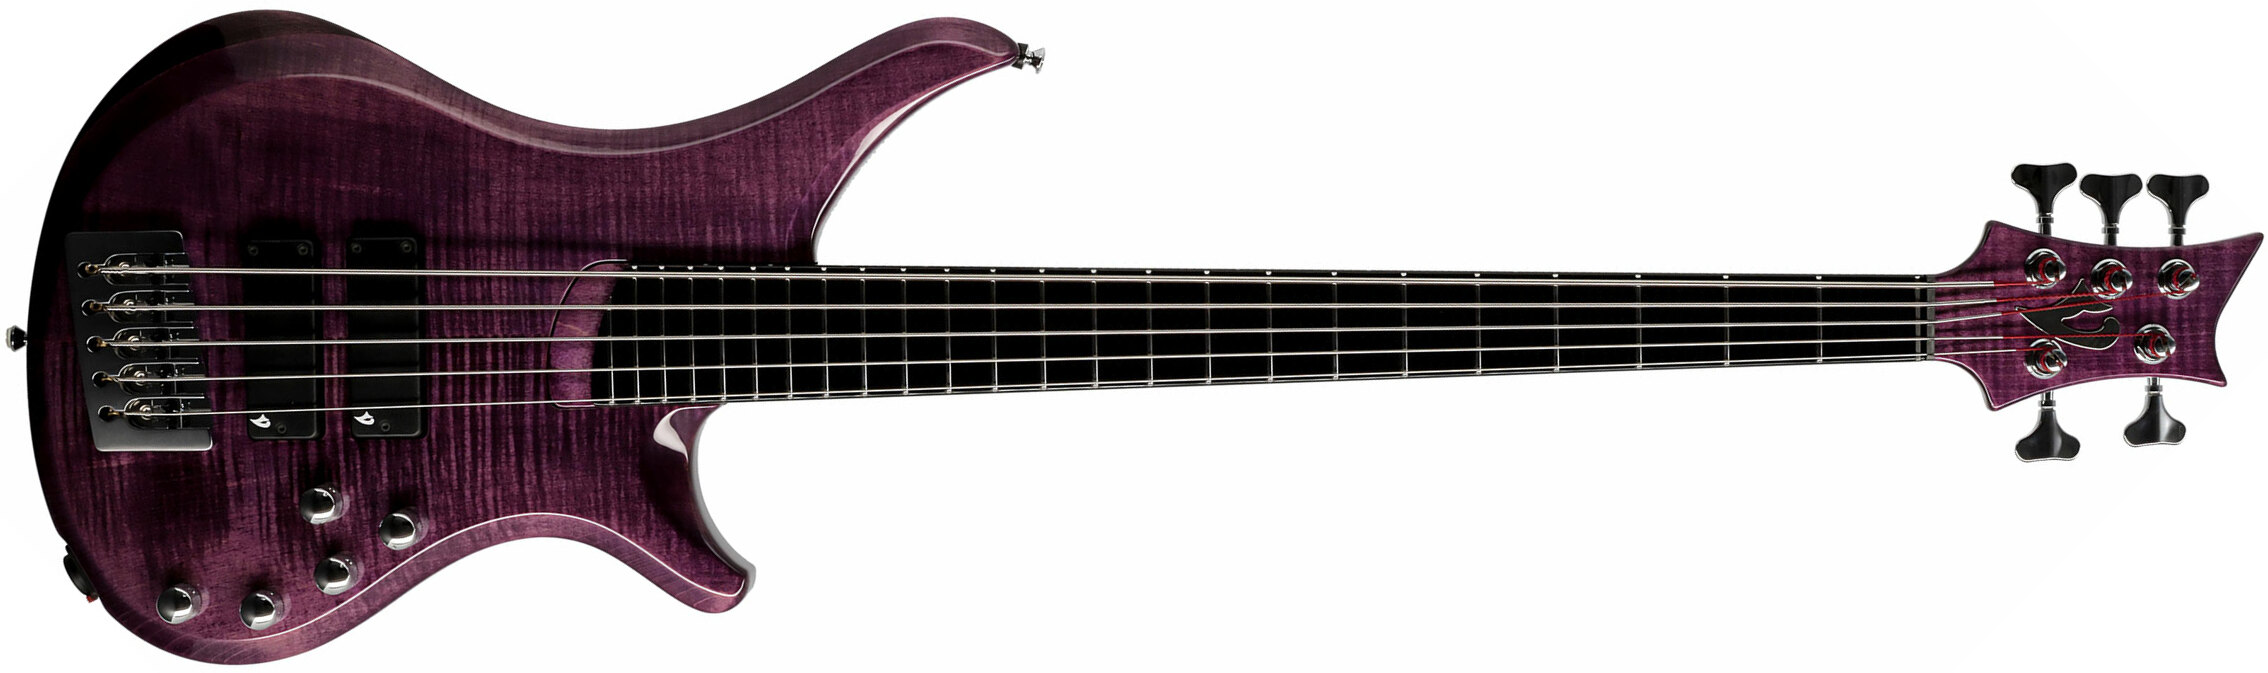 Vigier Passion Iv 5c Active Phe - Amethyst Purple - Solid body electric bass - Main picture